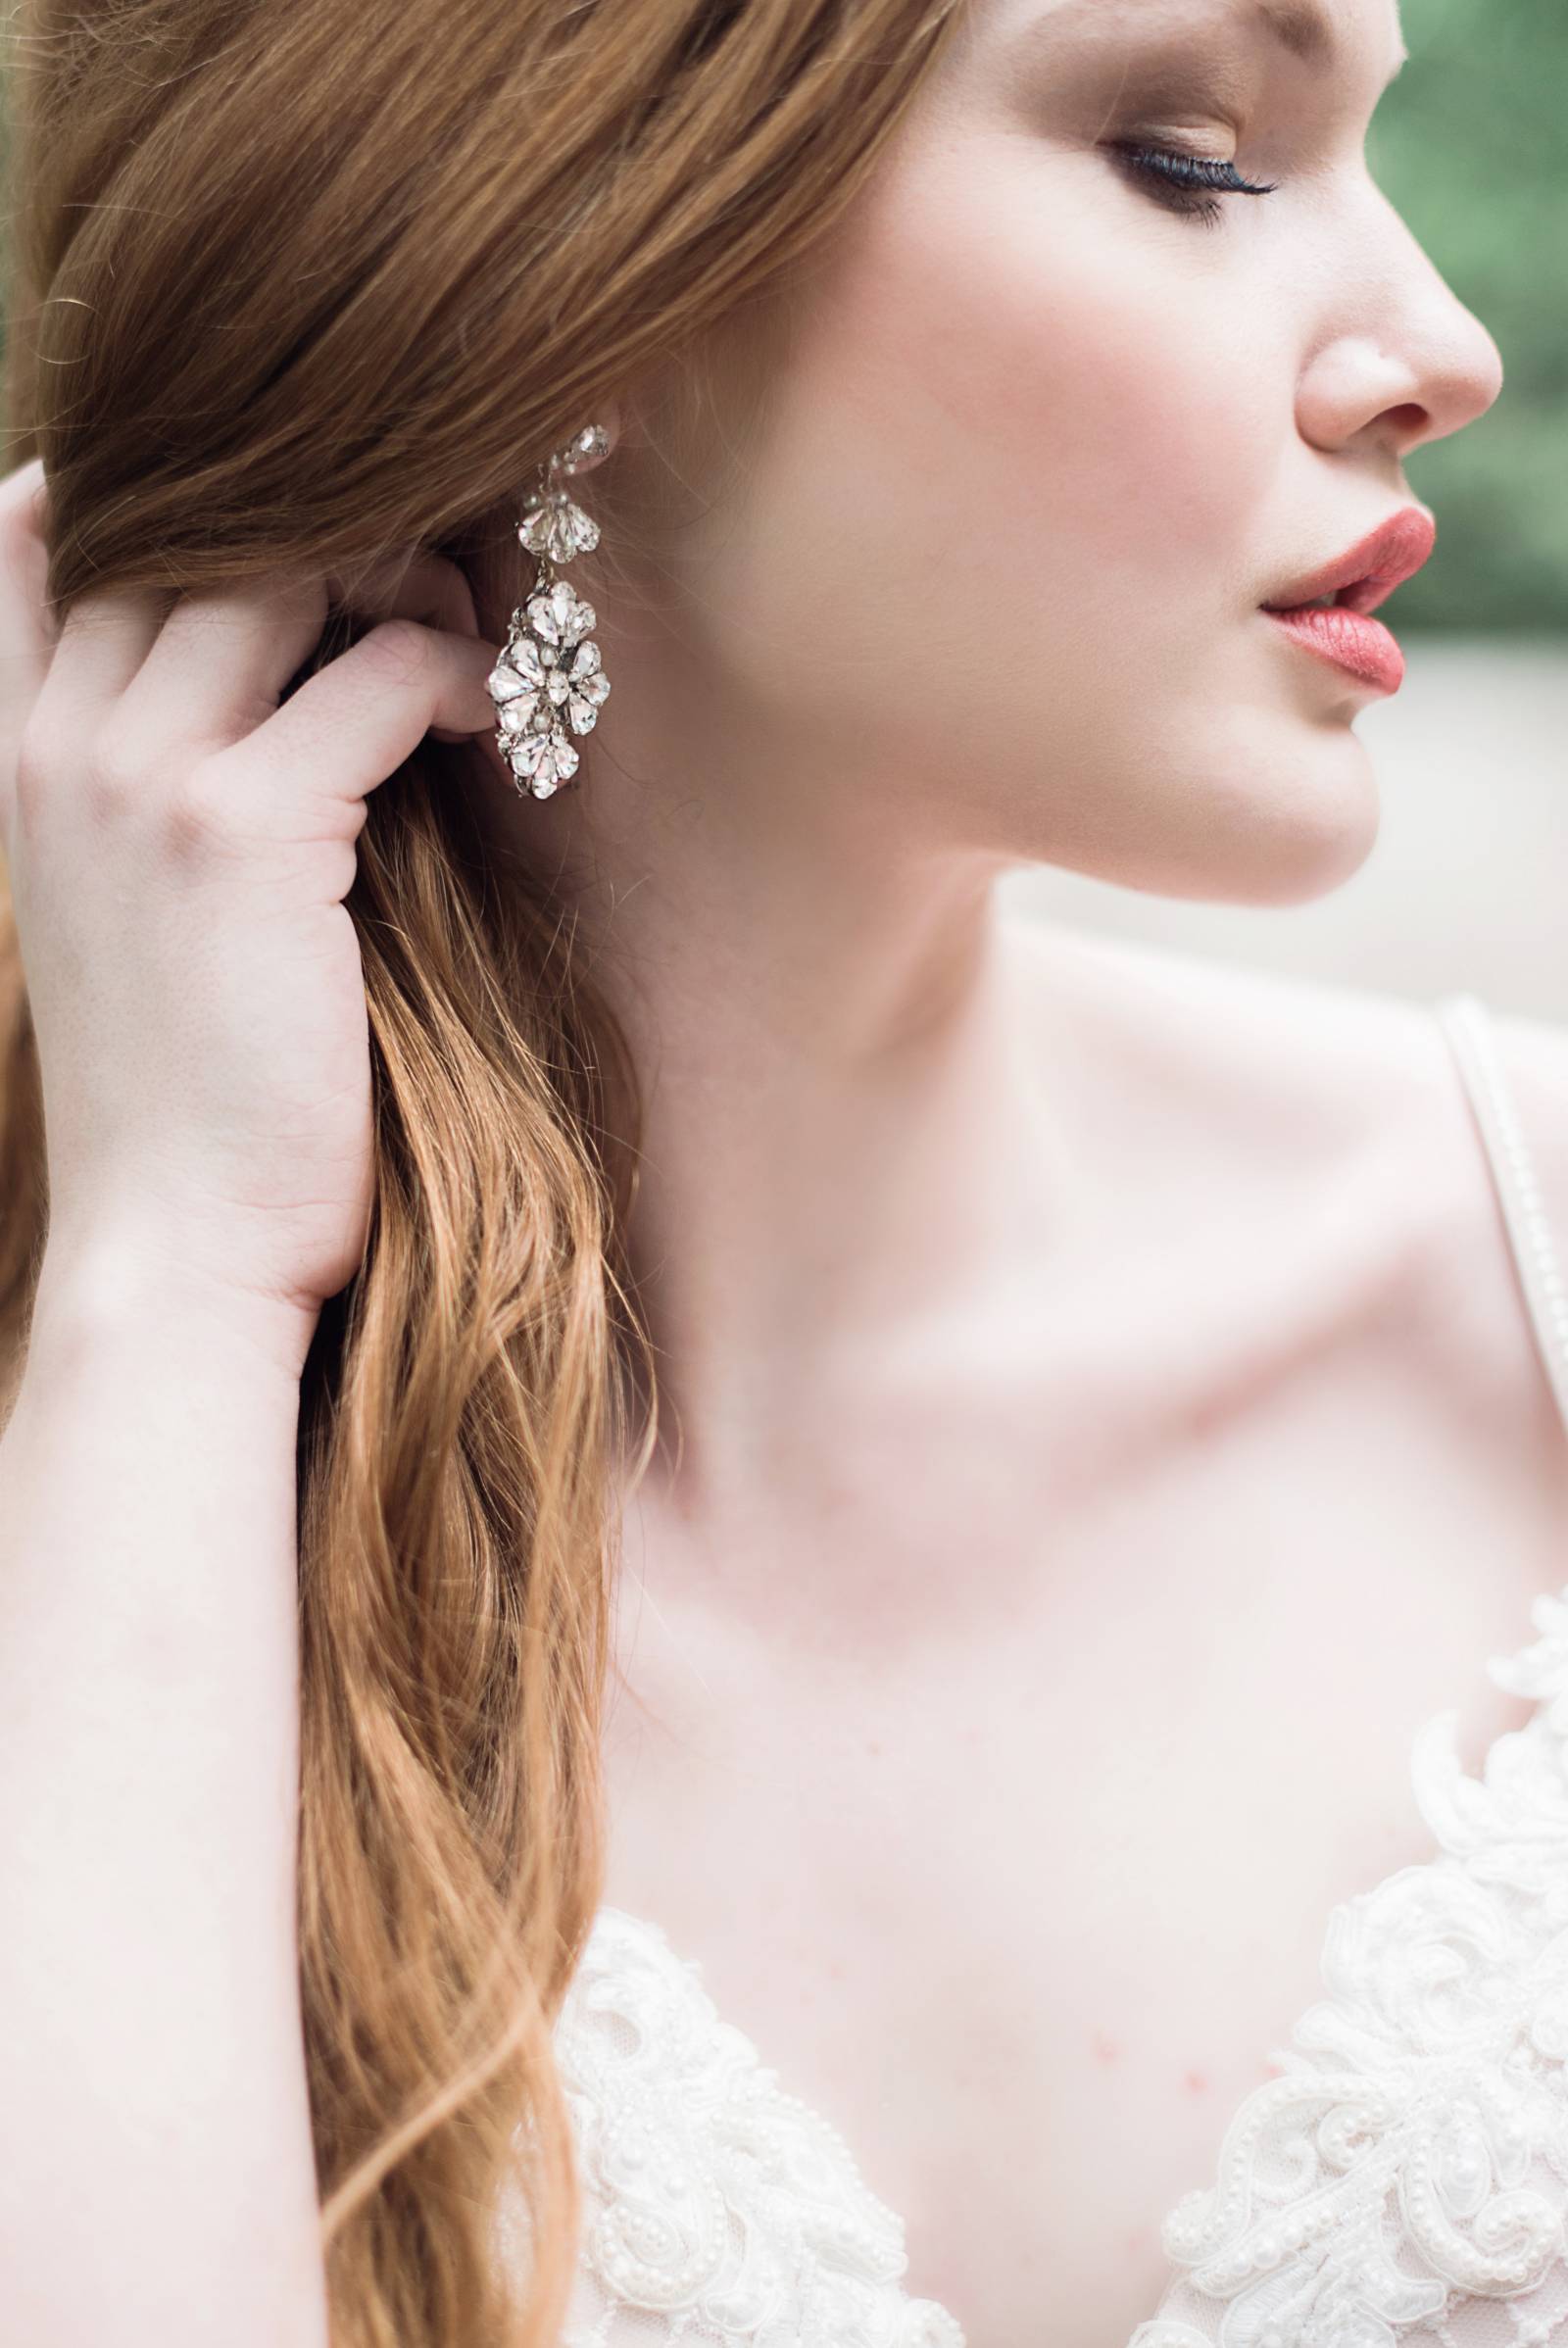 Stunning bridal makeup and accessories